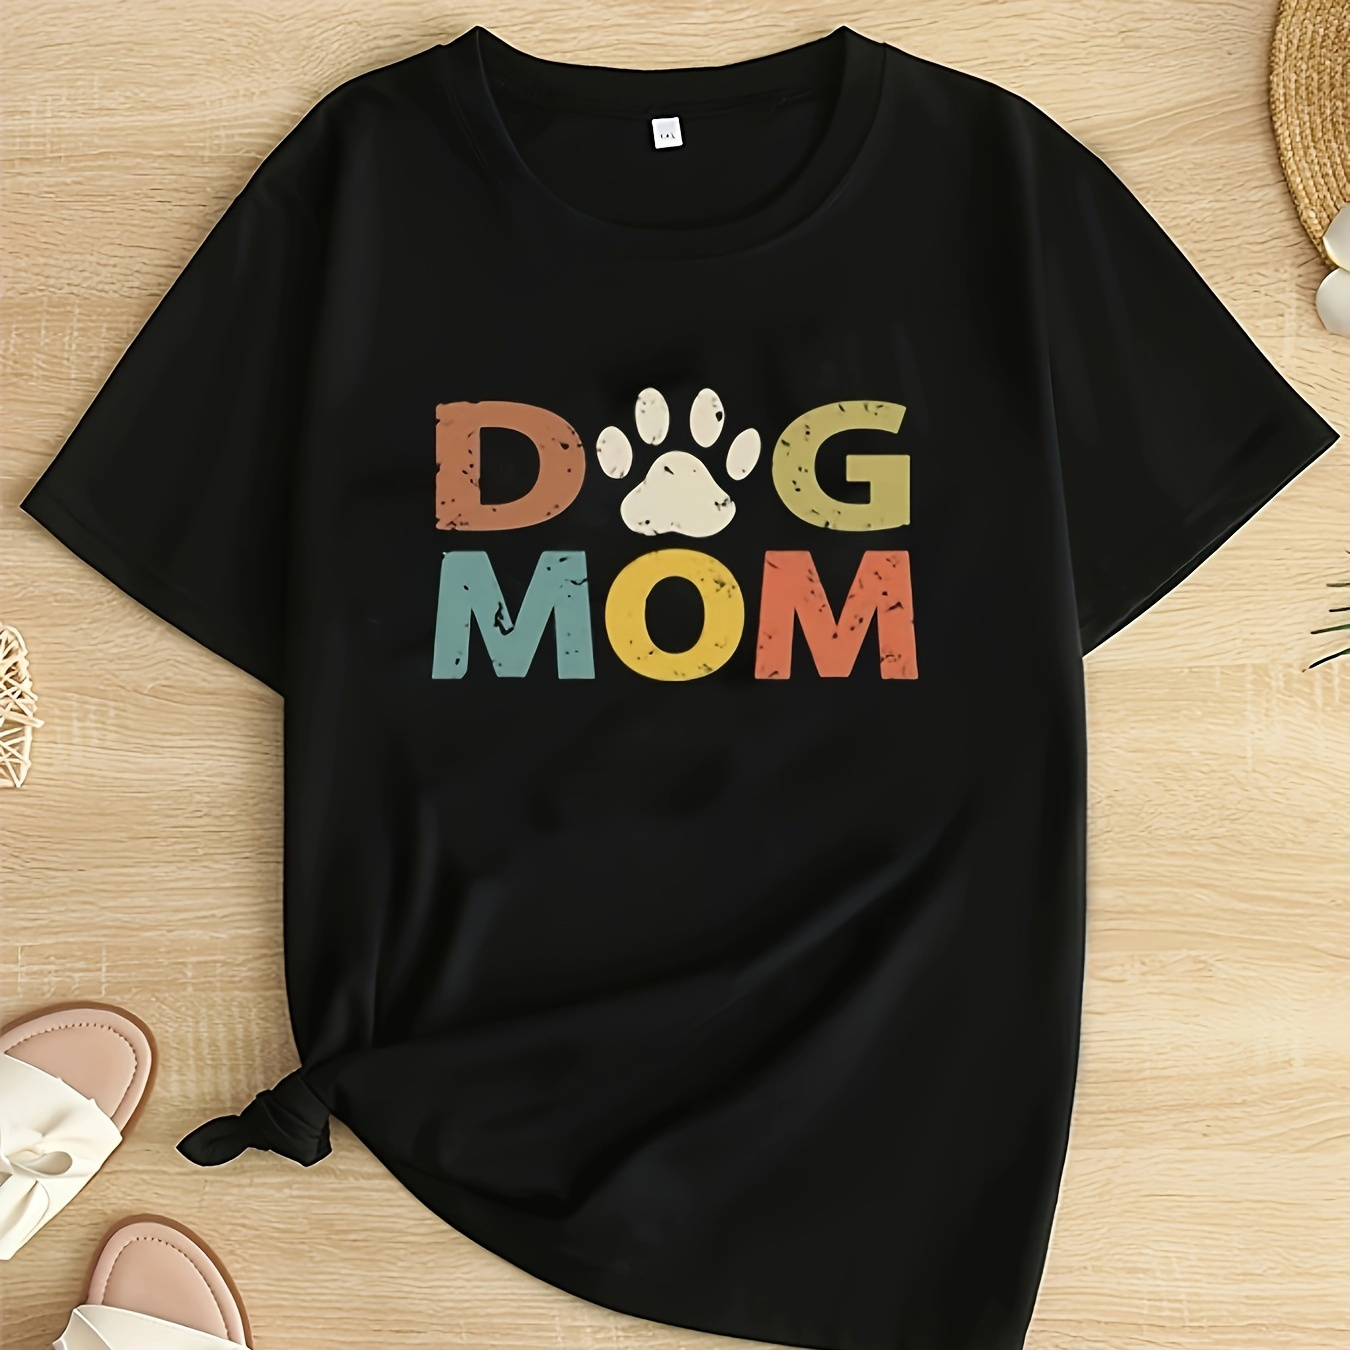 

Plus Size Dog Mom Print T-shirt, Casual Short Sleeve Crew Neck Top For Spring & Summer, Women's Plus Size Clothing